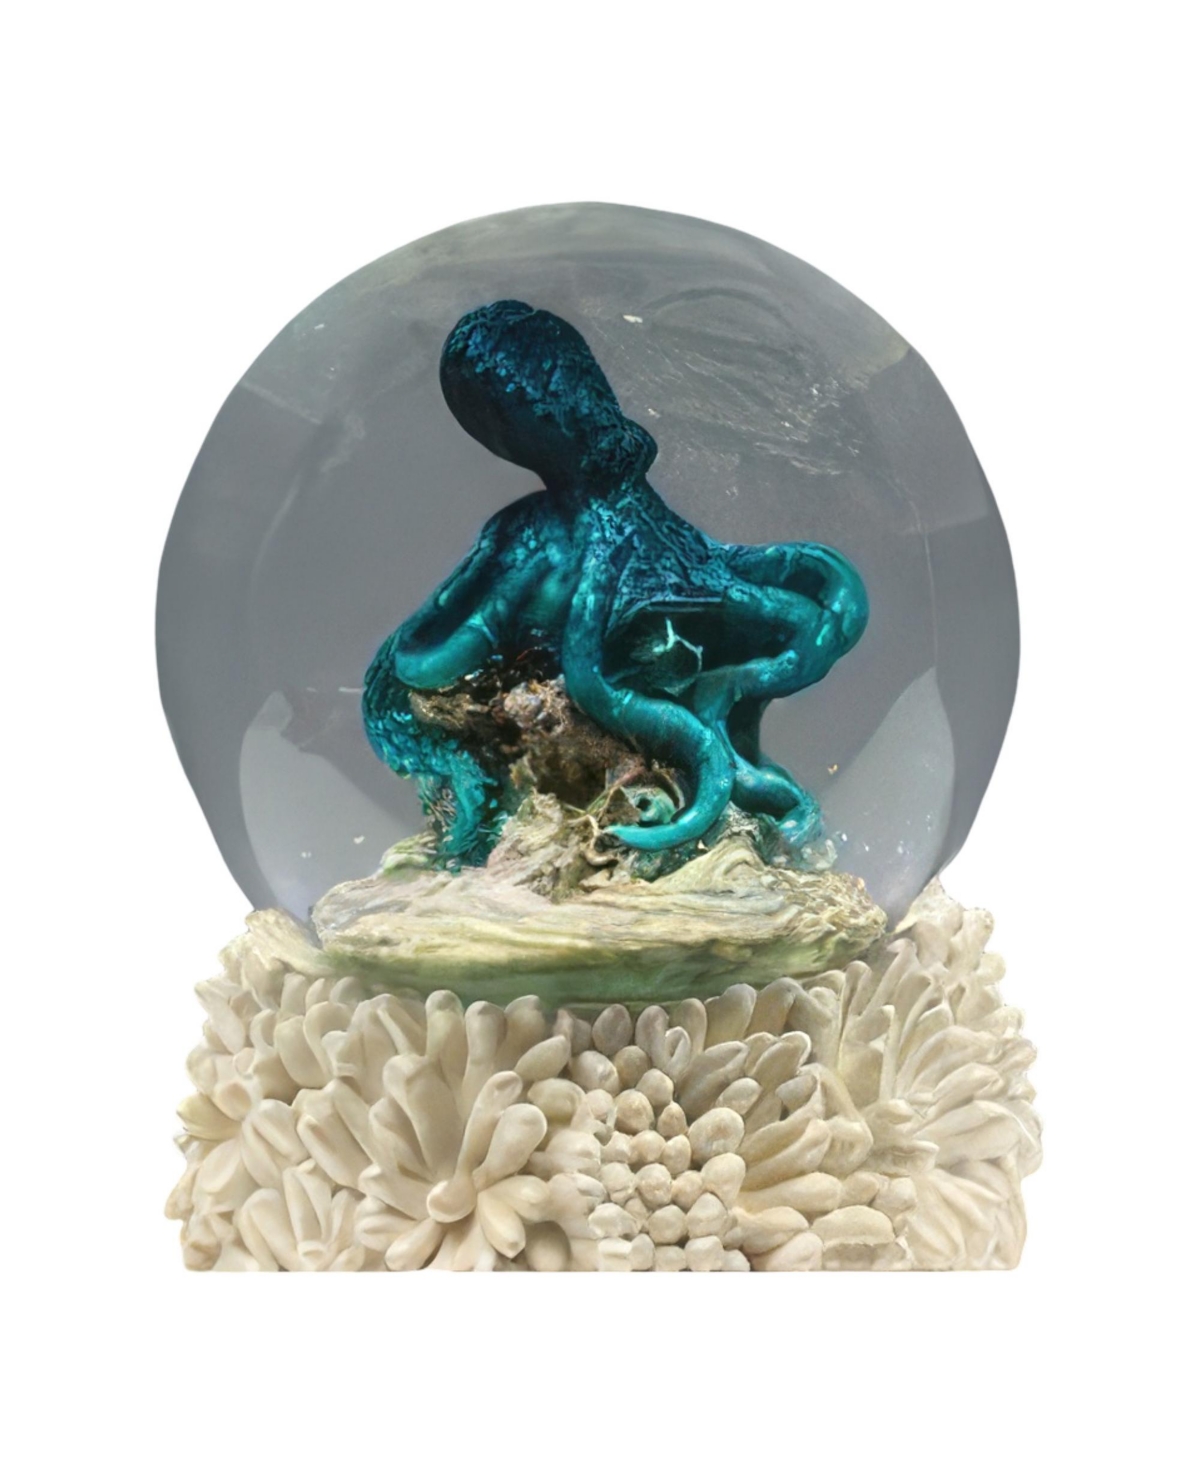 3"H Octopus Snow Globe Home Decor Perfect Gift for House Warming, Holidays and Birthdays - Multicolor